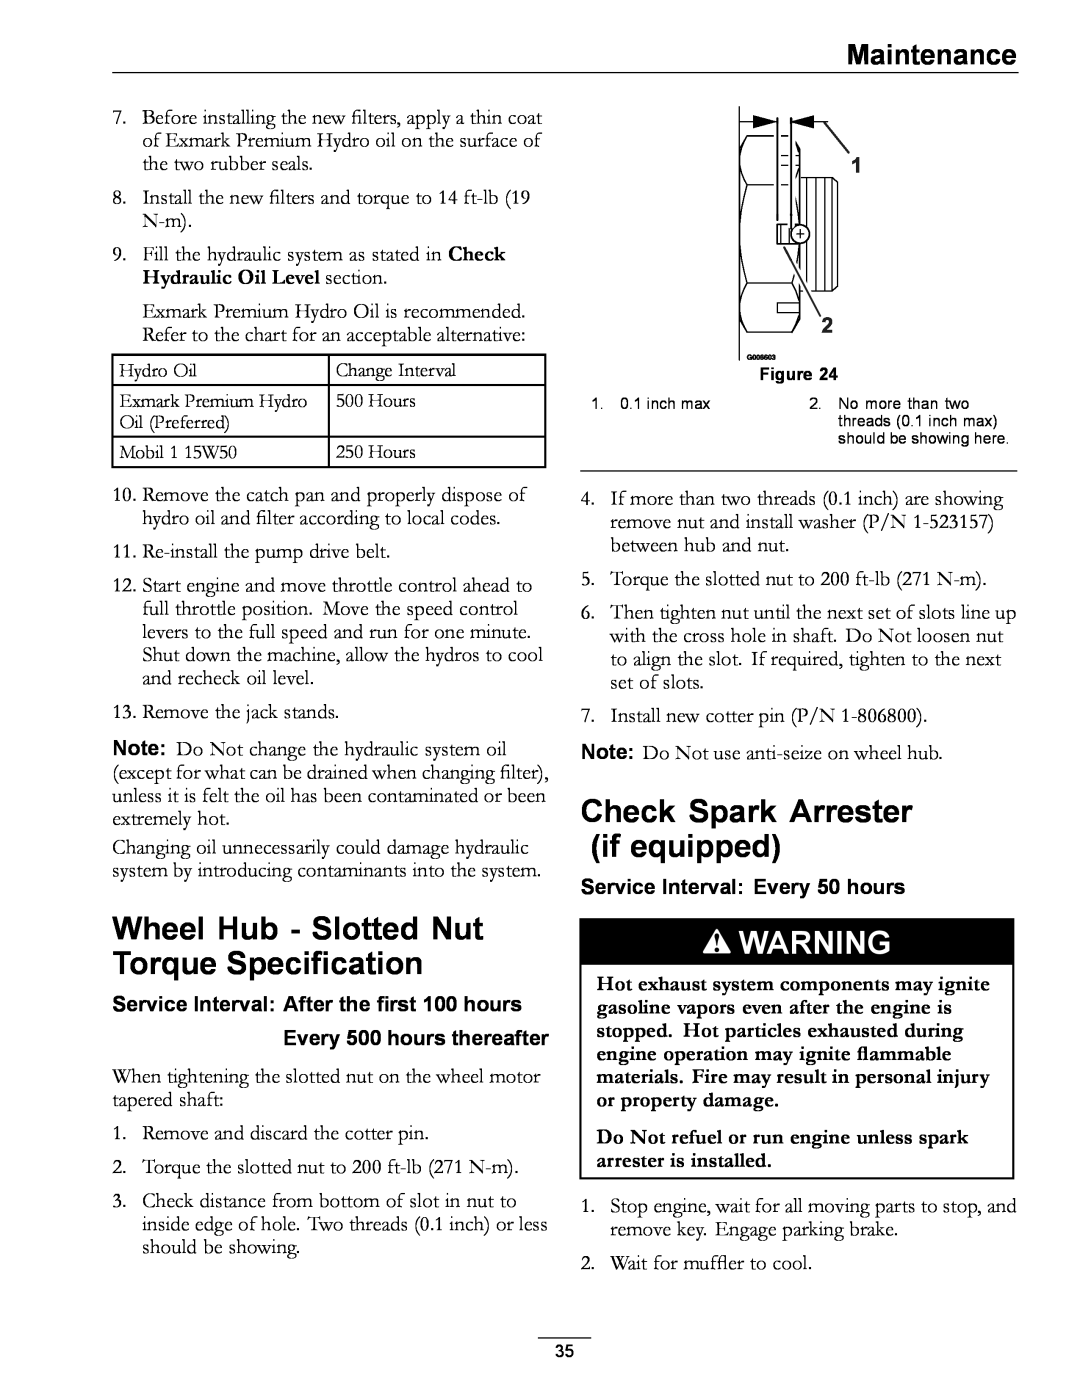 Exmark 4500-507 manual Check Spark Arrester if equipped, Wheel Hub - Slotted Nut Torque Specification, Maintenance 